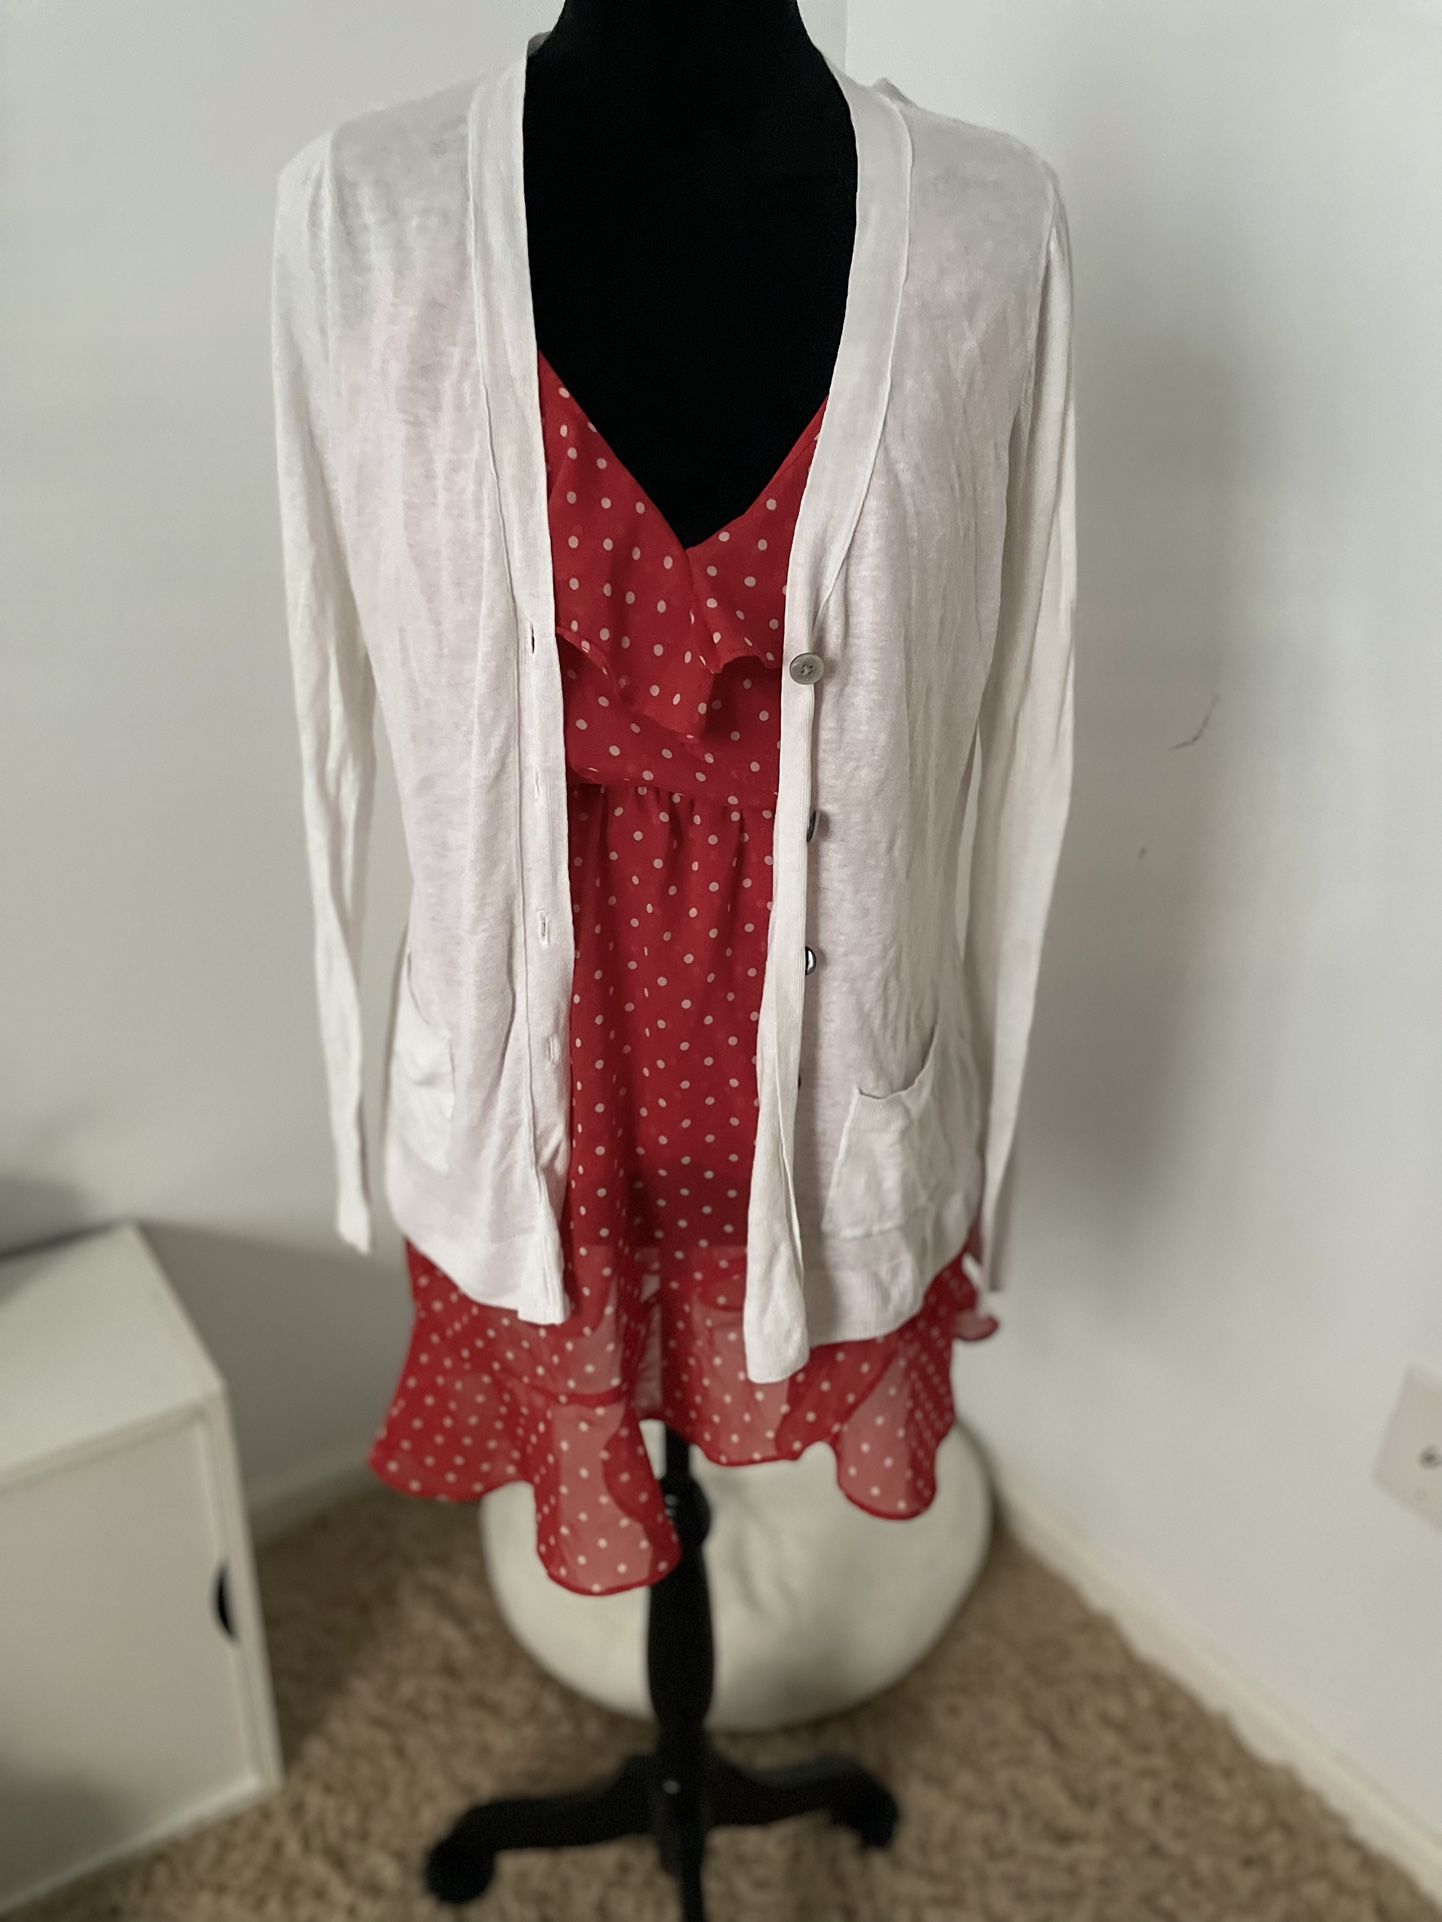 Cynthia Rowley cardigan and Forever21 dress